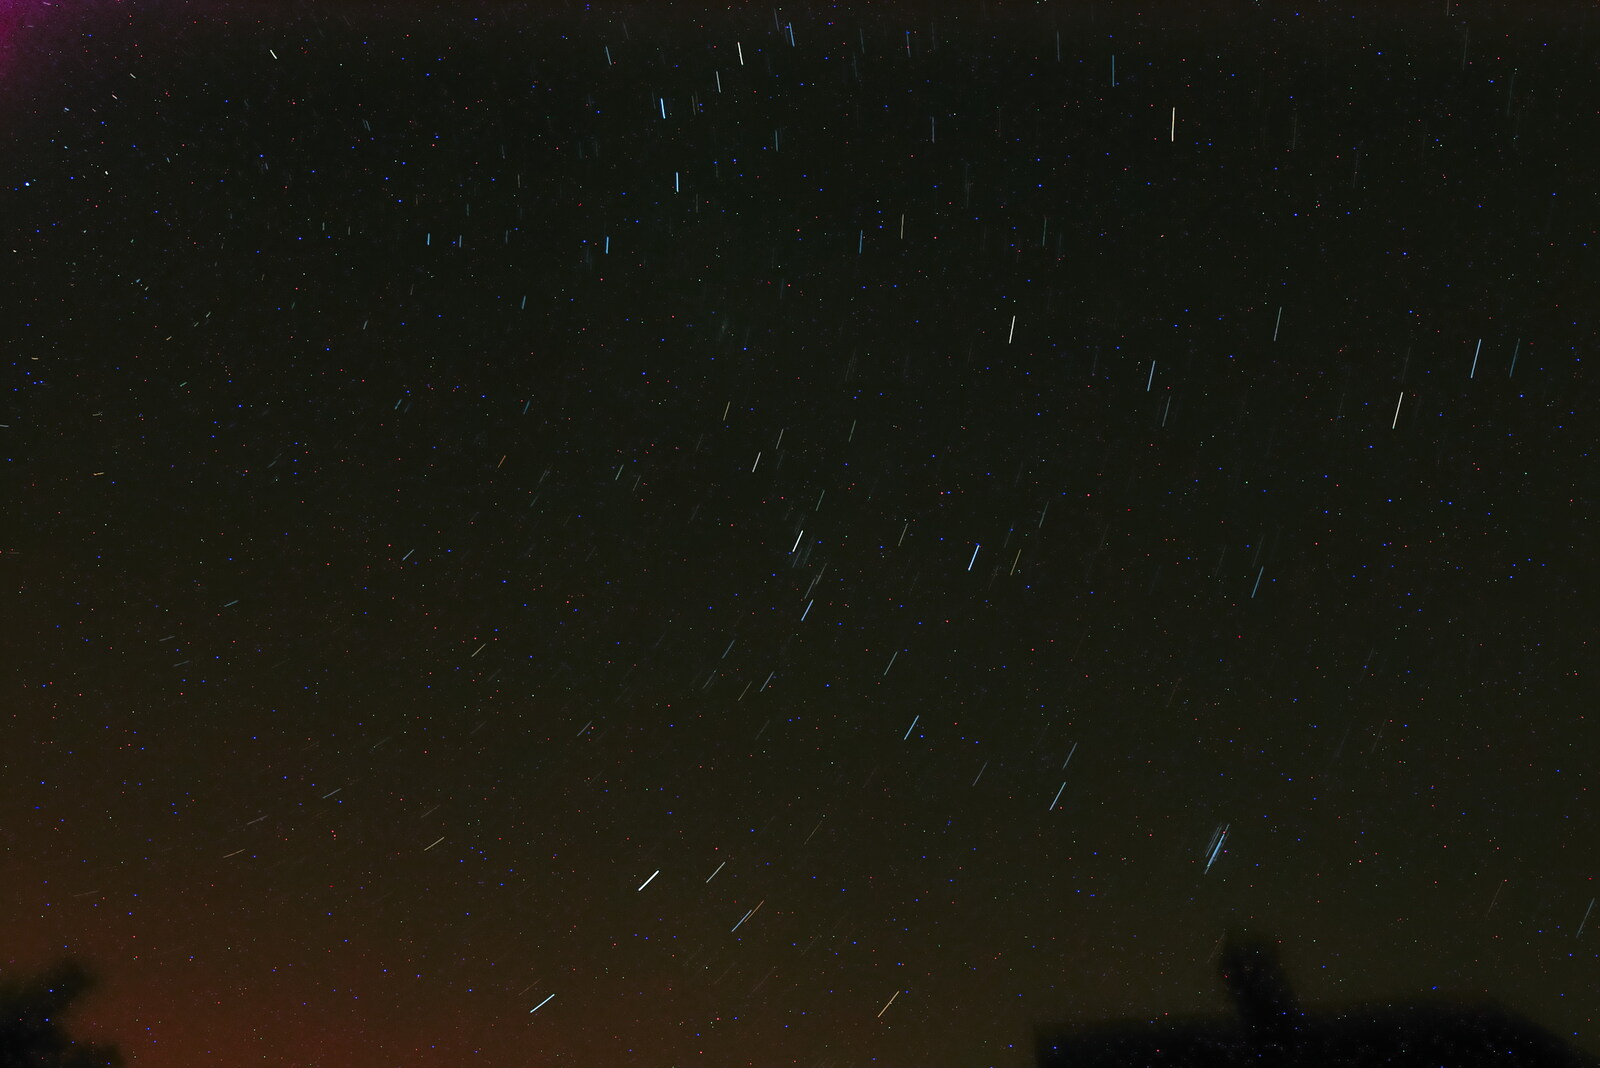 A star trail from Life on the Neonatal Ward, Dairy Farm and Thrandeston Chapel, Suffolk - 26th August 2005